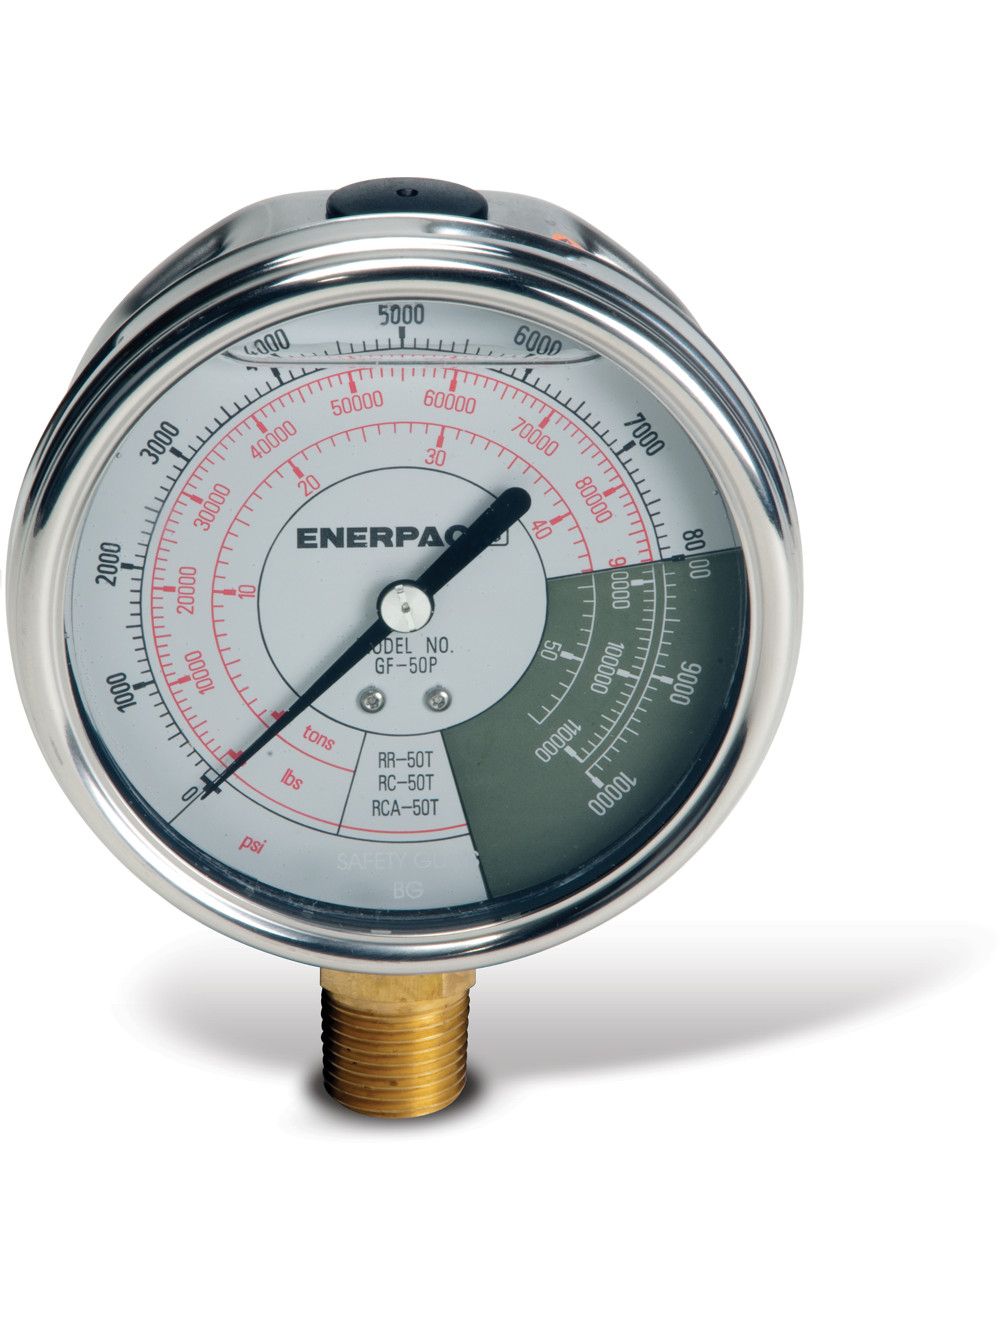 GF50P, Hydraulic Force and Pressure Gauge, Imperial for with up to 55 ton Cylinders | Enerpac